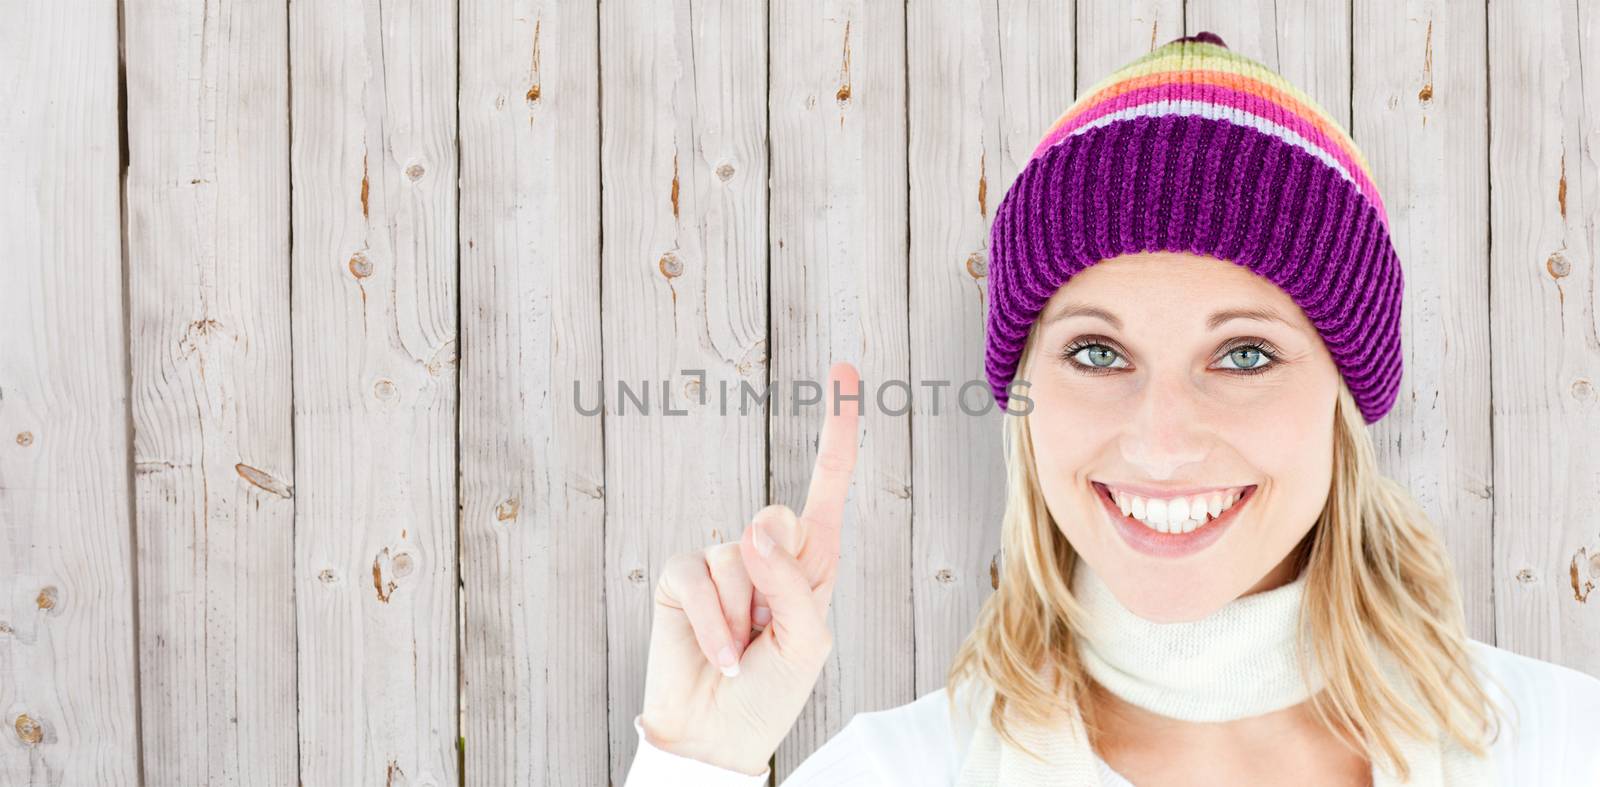 Positive woman showing up smiling at the camera against white background against wooden background